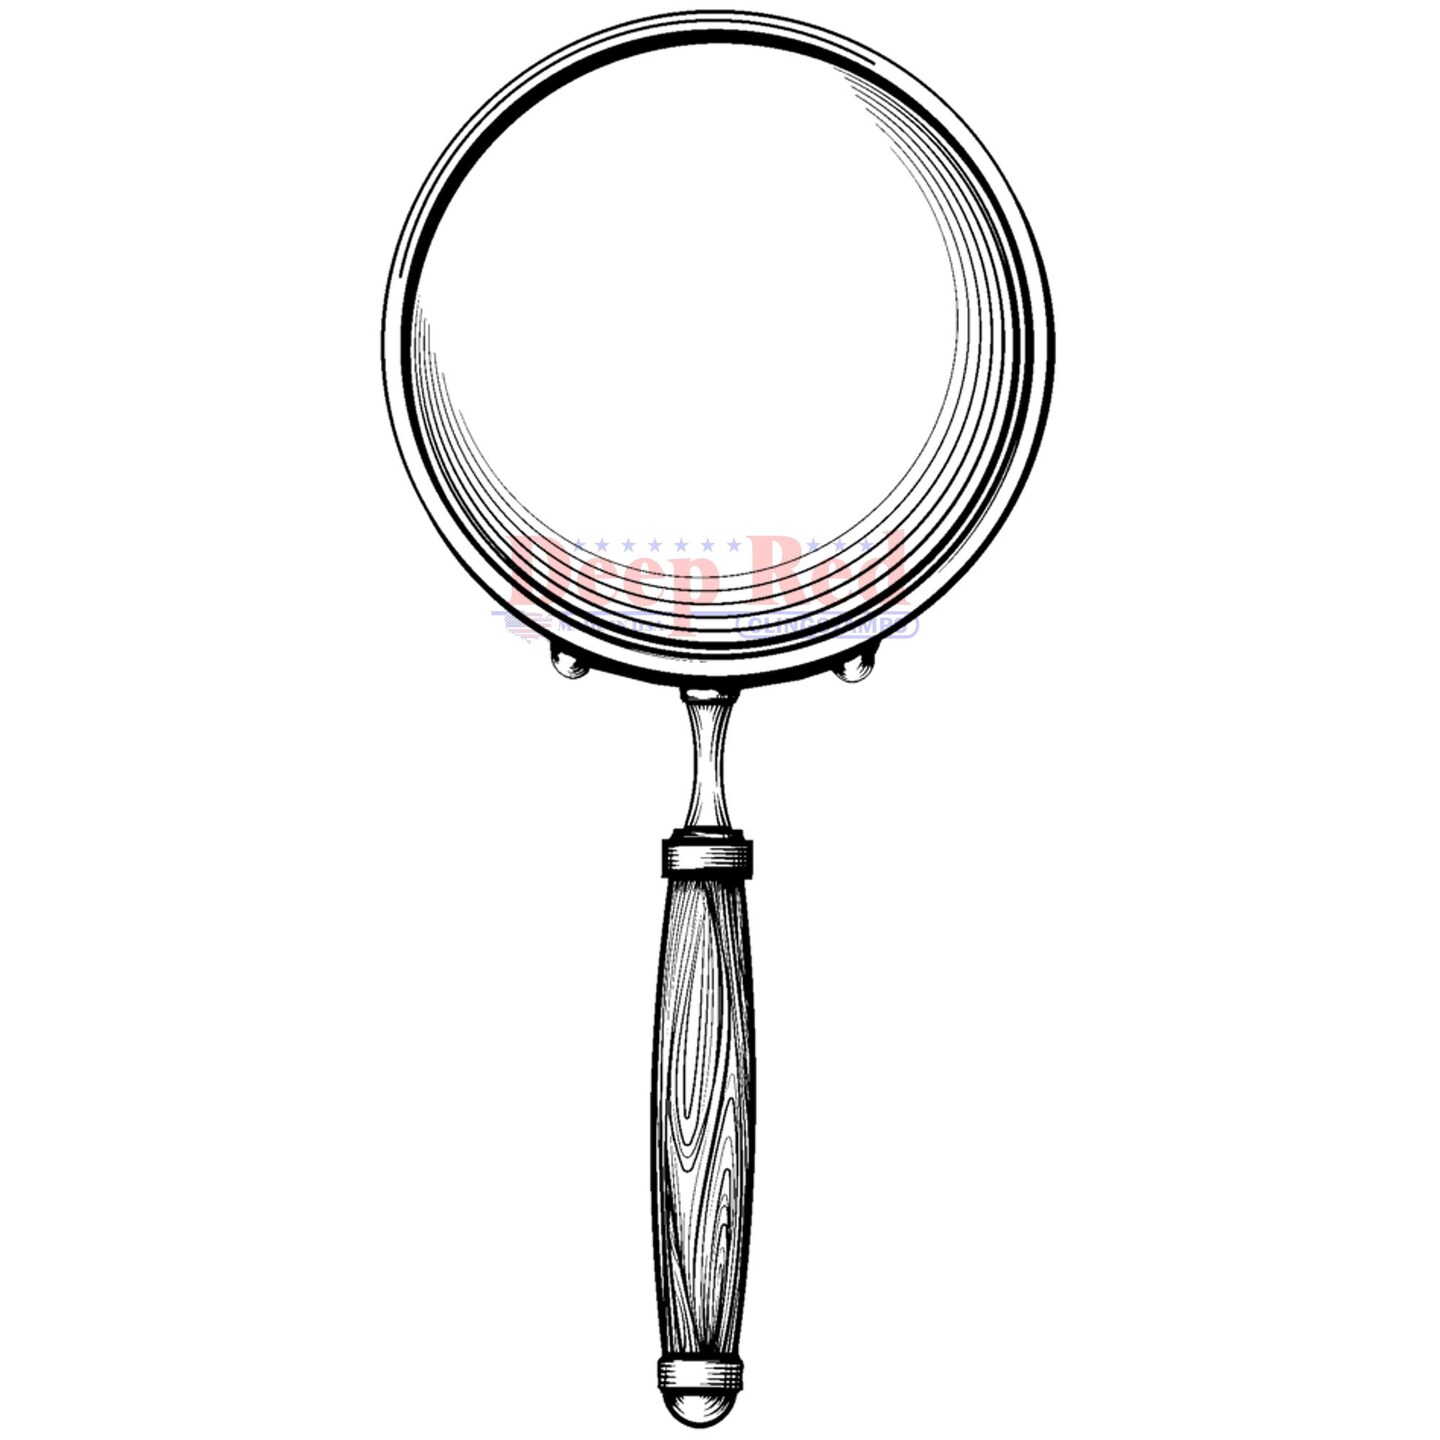 Deep Red Stamps Magnifying Glass Rubber Cling Stamp 3.2 x 1.5 inches